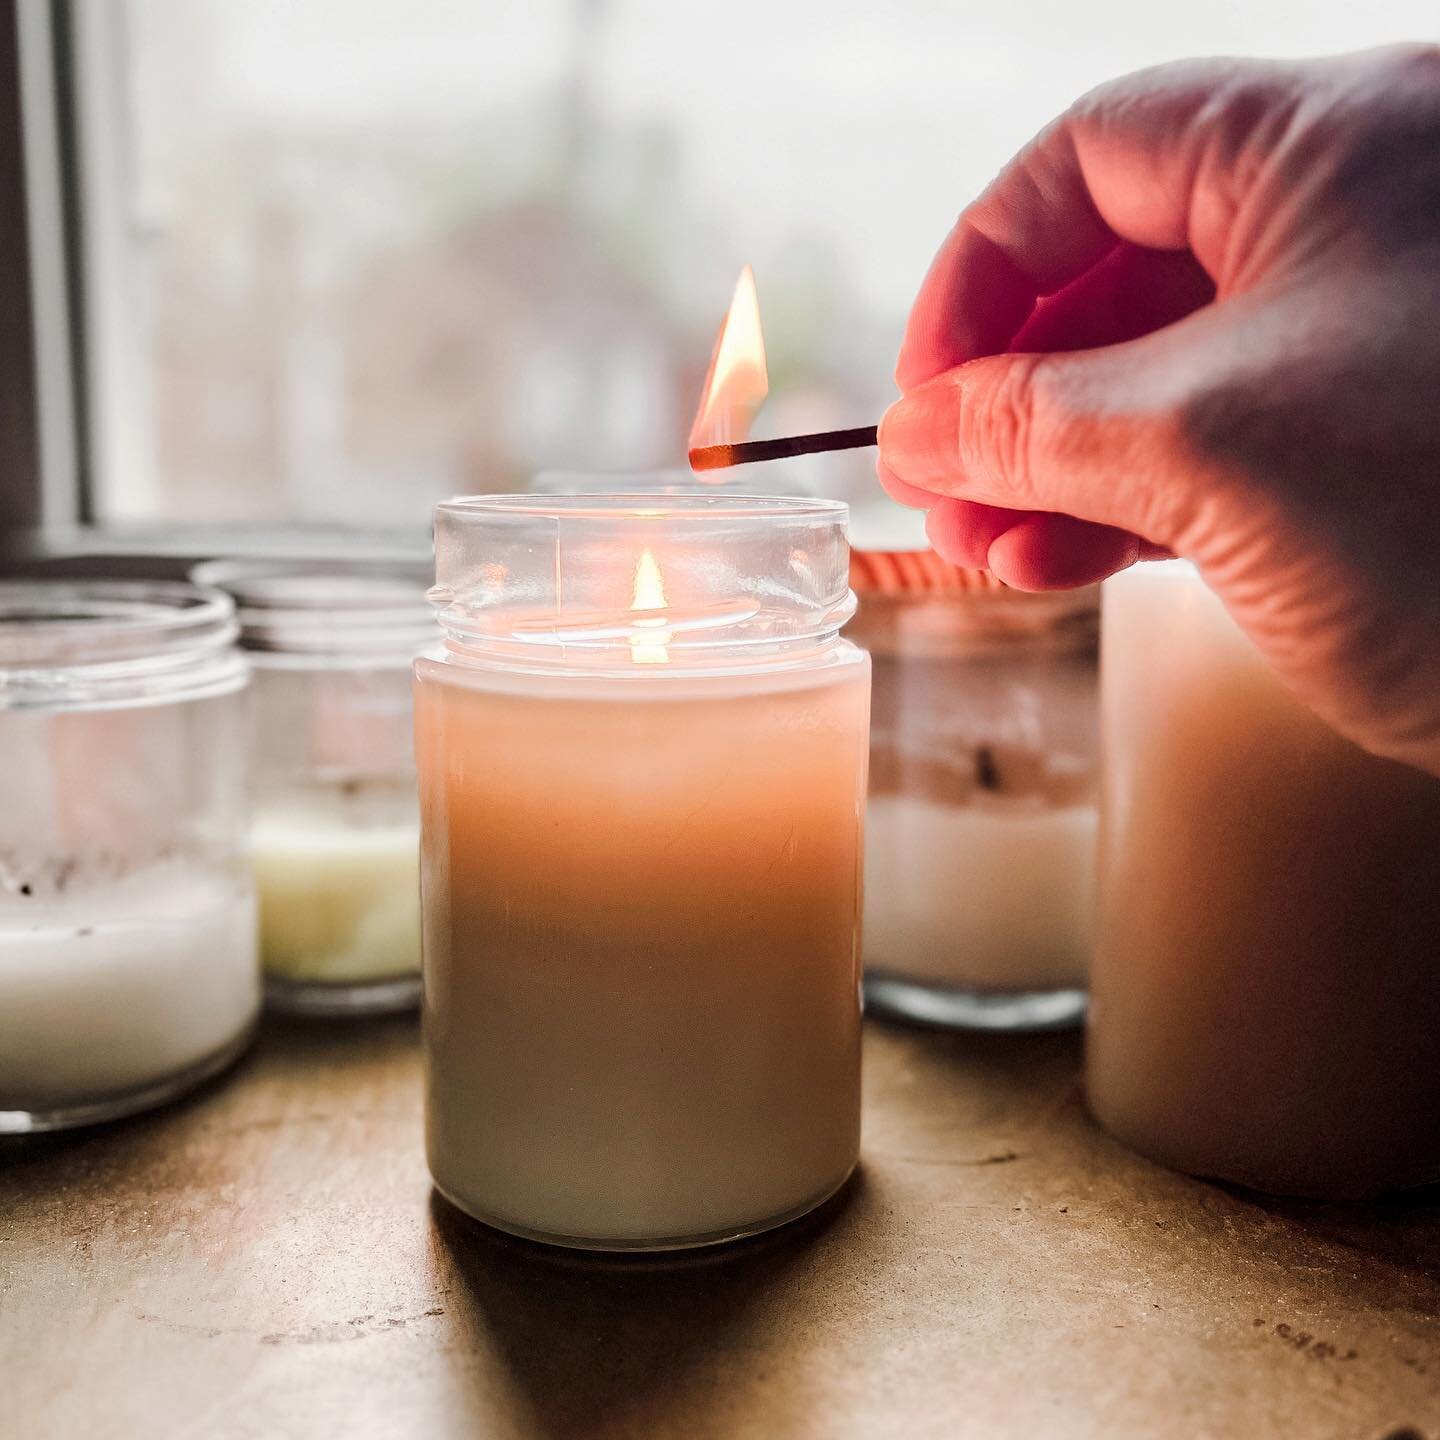 To Boston with love 💙

Before last May I never thought of anything while lighting a candle. If going back to that meant people I love not being in pain, I&rsquo;d prefer it. But that&rsquo;s not how life works. 

Every time I light a candle now I th